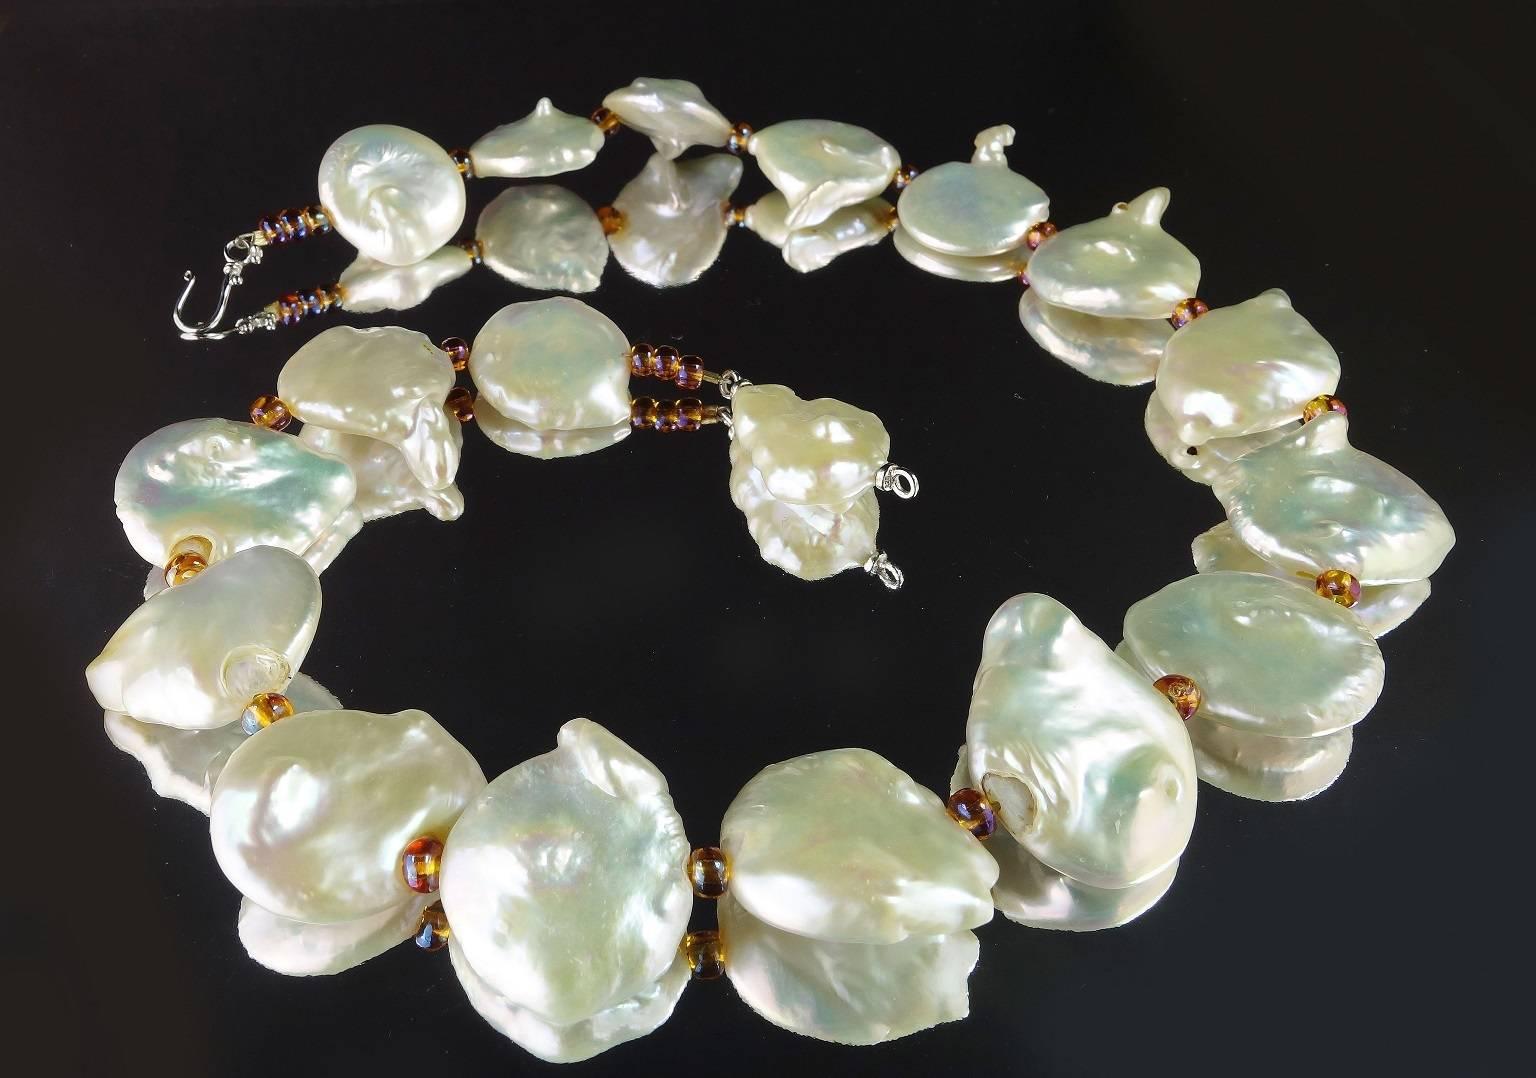 Artisan AJD Large White Coin Pearl Necklace